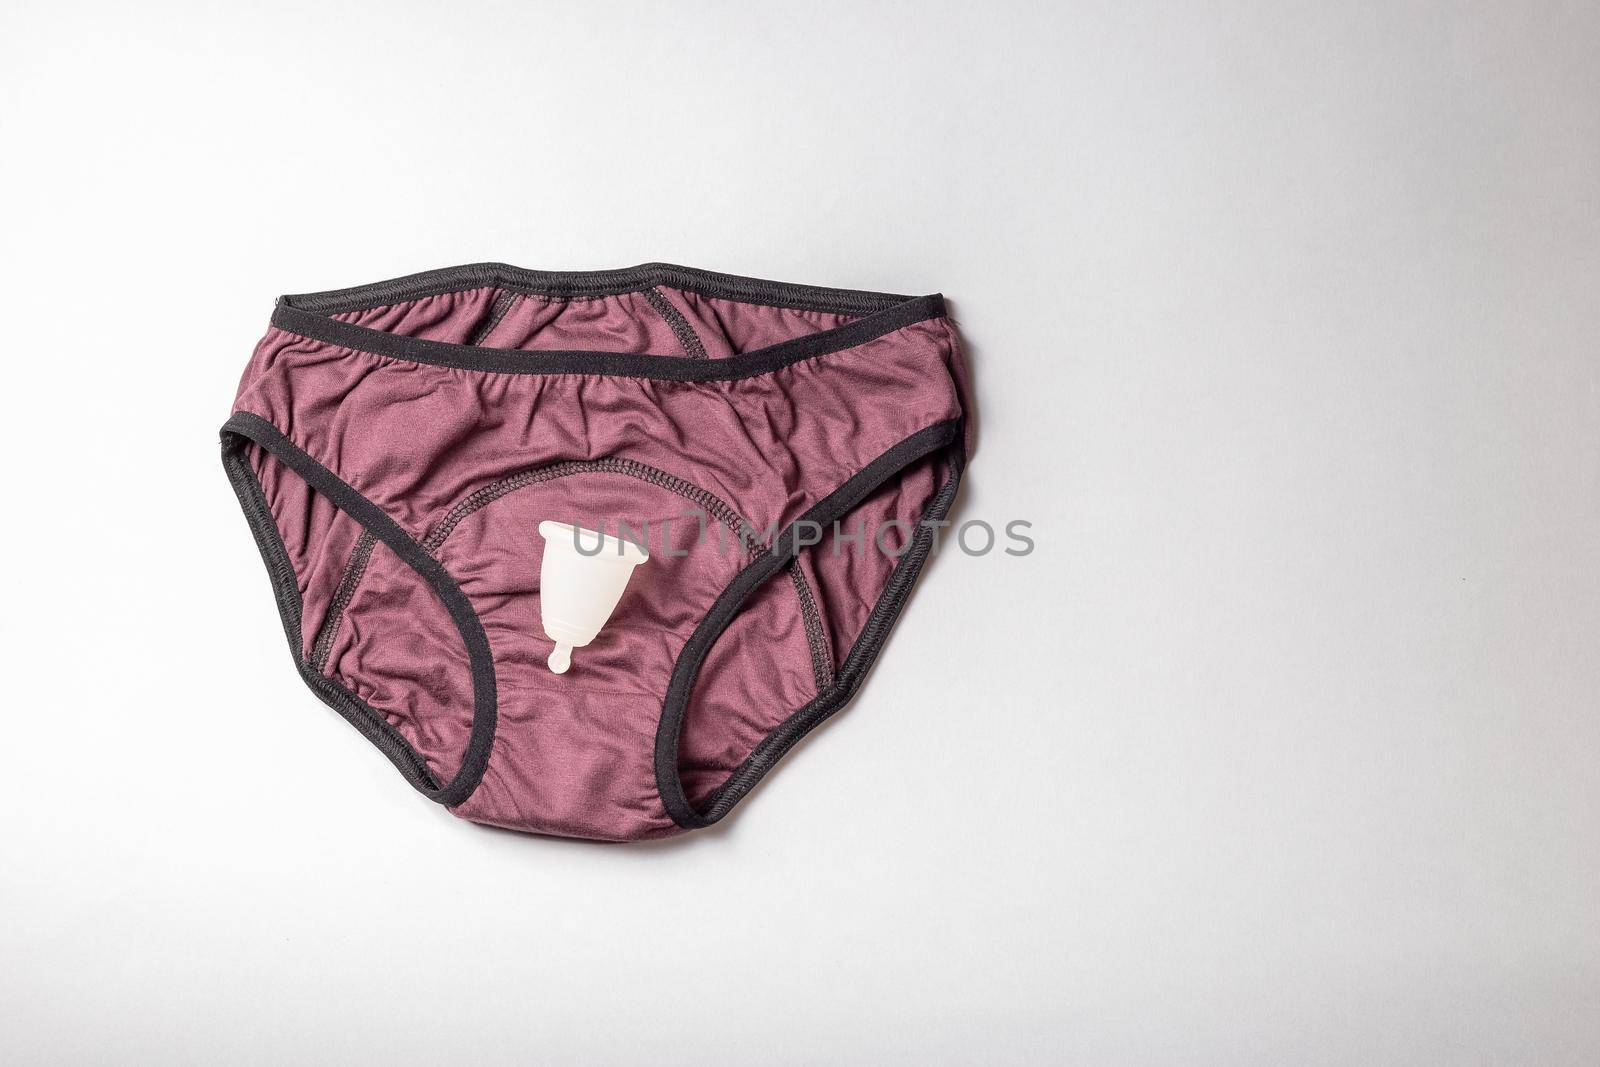 Period underwear panties and menstrual cup on grey by Syvanych